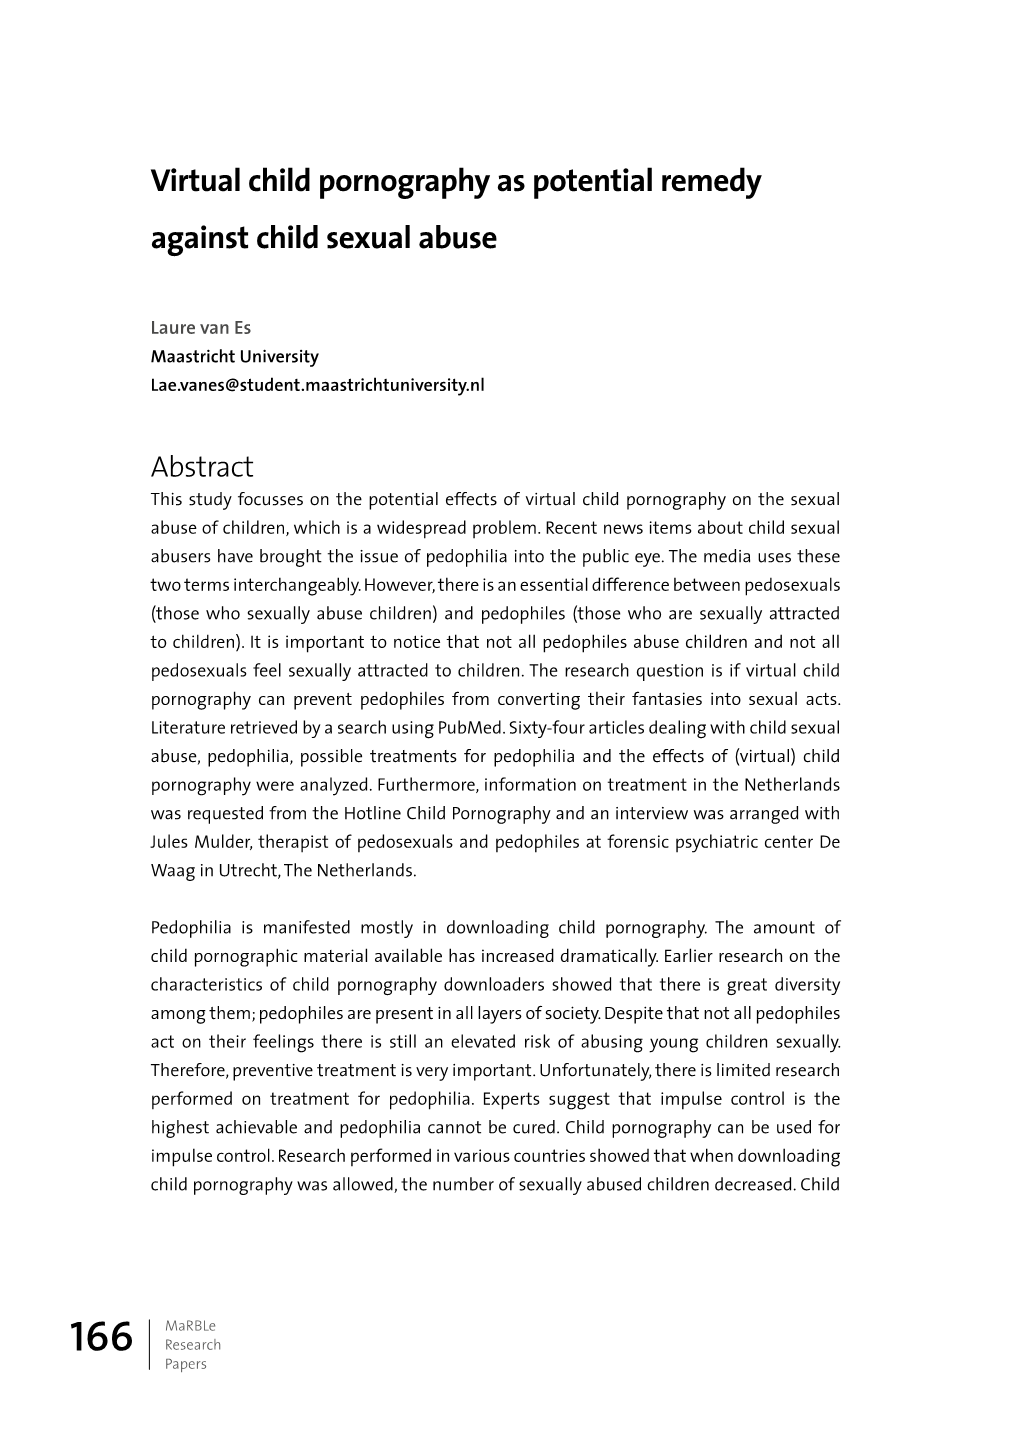 Virtual Child Pornography As Potential Remedy Against Child Sexual Abuse